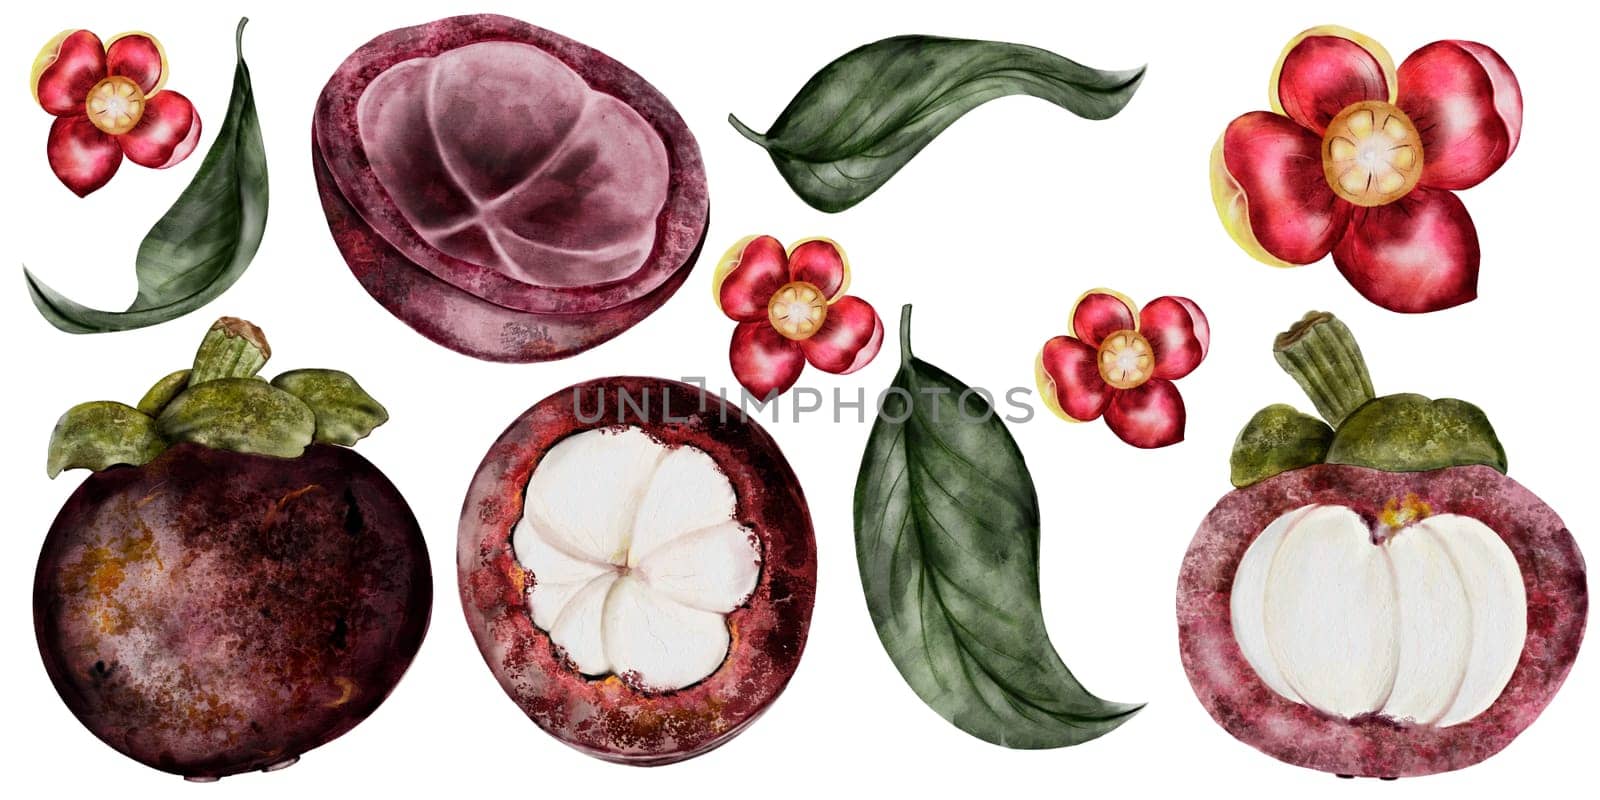 Mangosteen fruit big watercolor set. Tropical fruit illustration hand drawing isolated on white background. Botanical clip art of asian food garcinia. Realistic sketch of a Thai fruit for restaurant menus and natural cosmetics packaging. High quality illustration